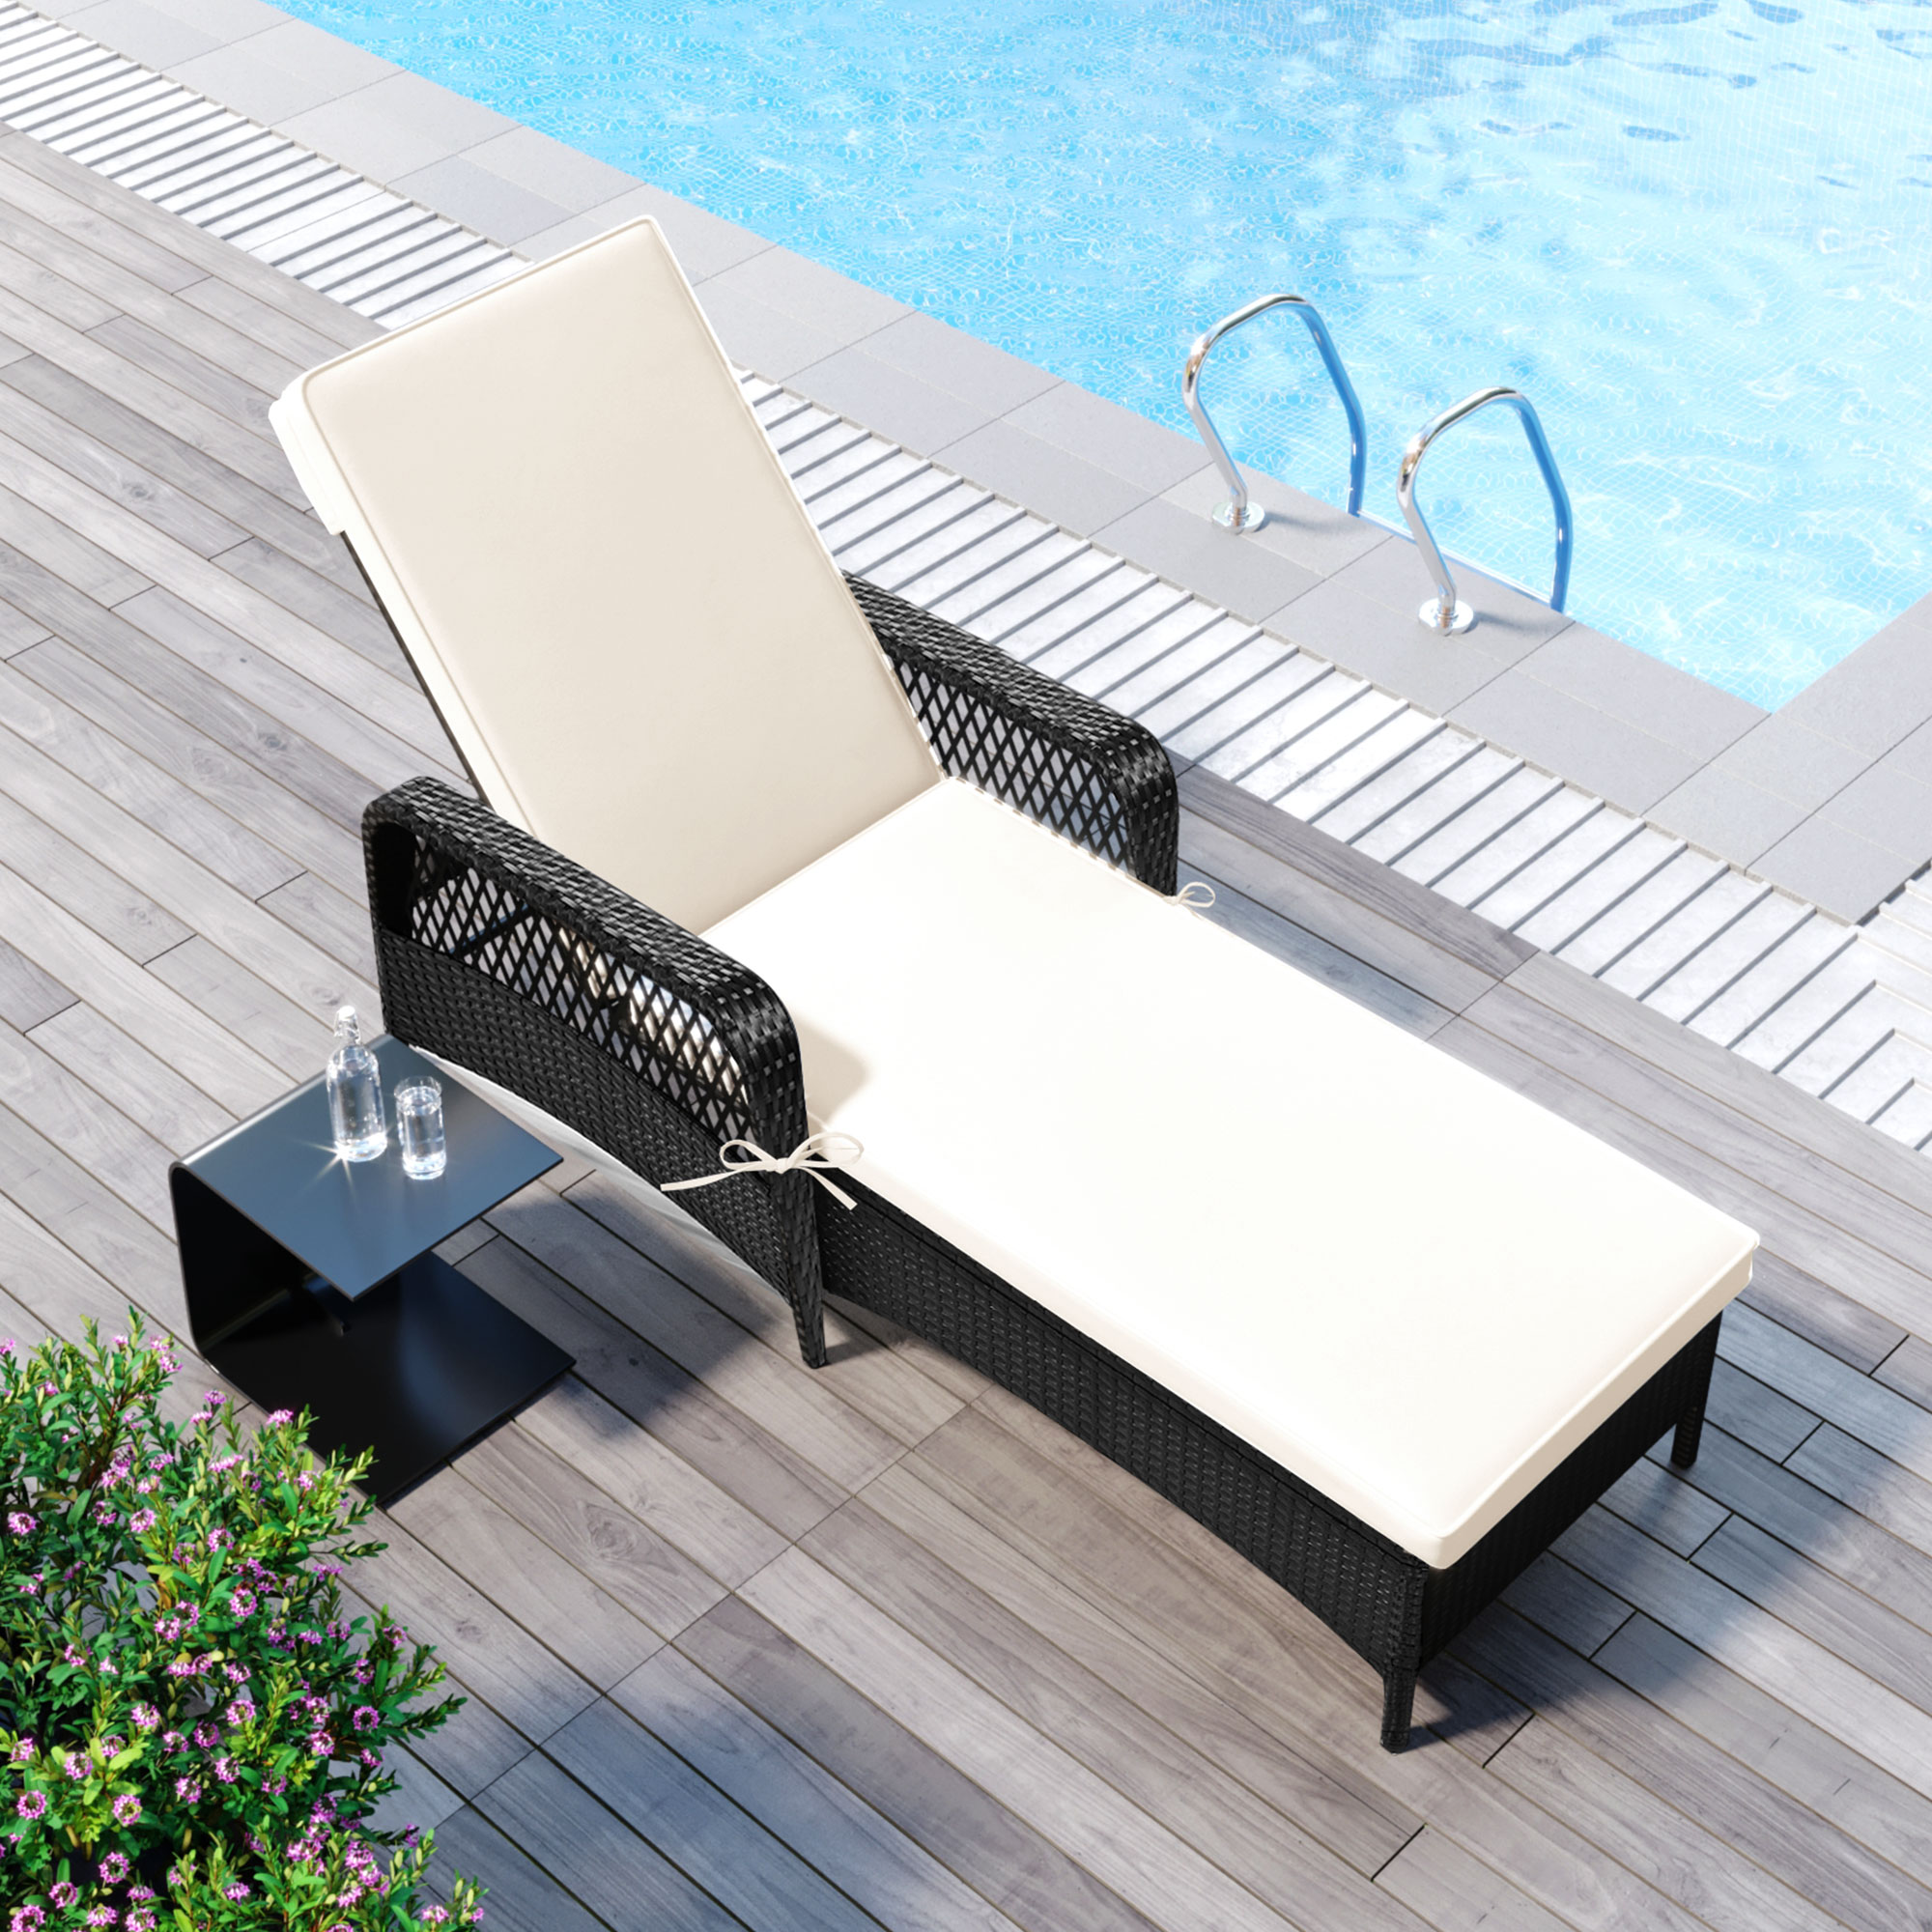 Patio Chaise Lounge Chair, Rattan Wicker Chaise Lounge, All-Weather Sun Chaise Lounge Furniture, Pool Furniture Sunbed with Removable Cushion, Tanning Lounge Chair with 5 Adjustable Positions, B336 - image 2 of 9